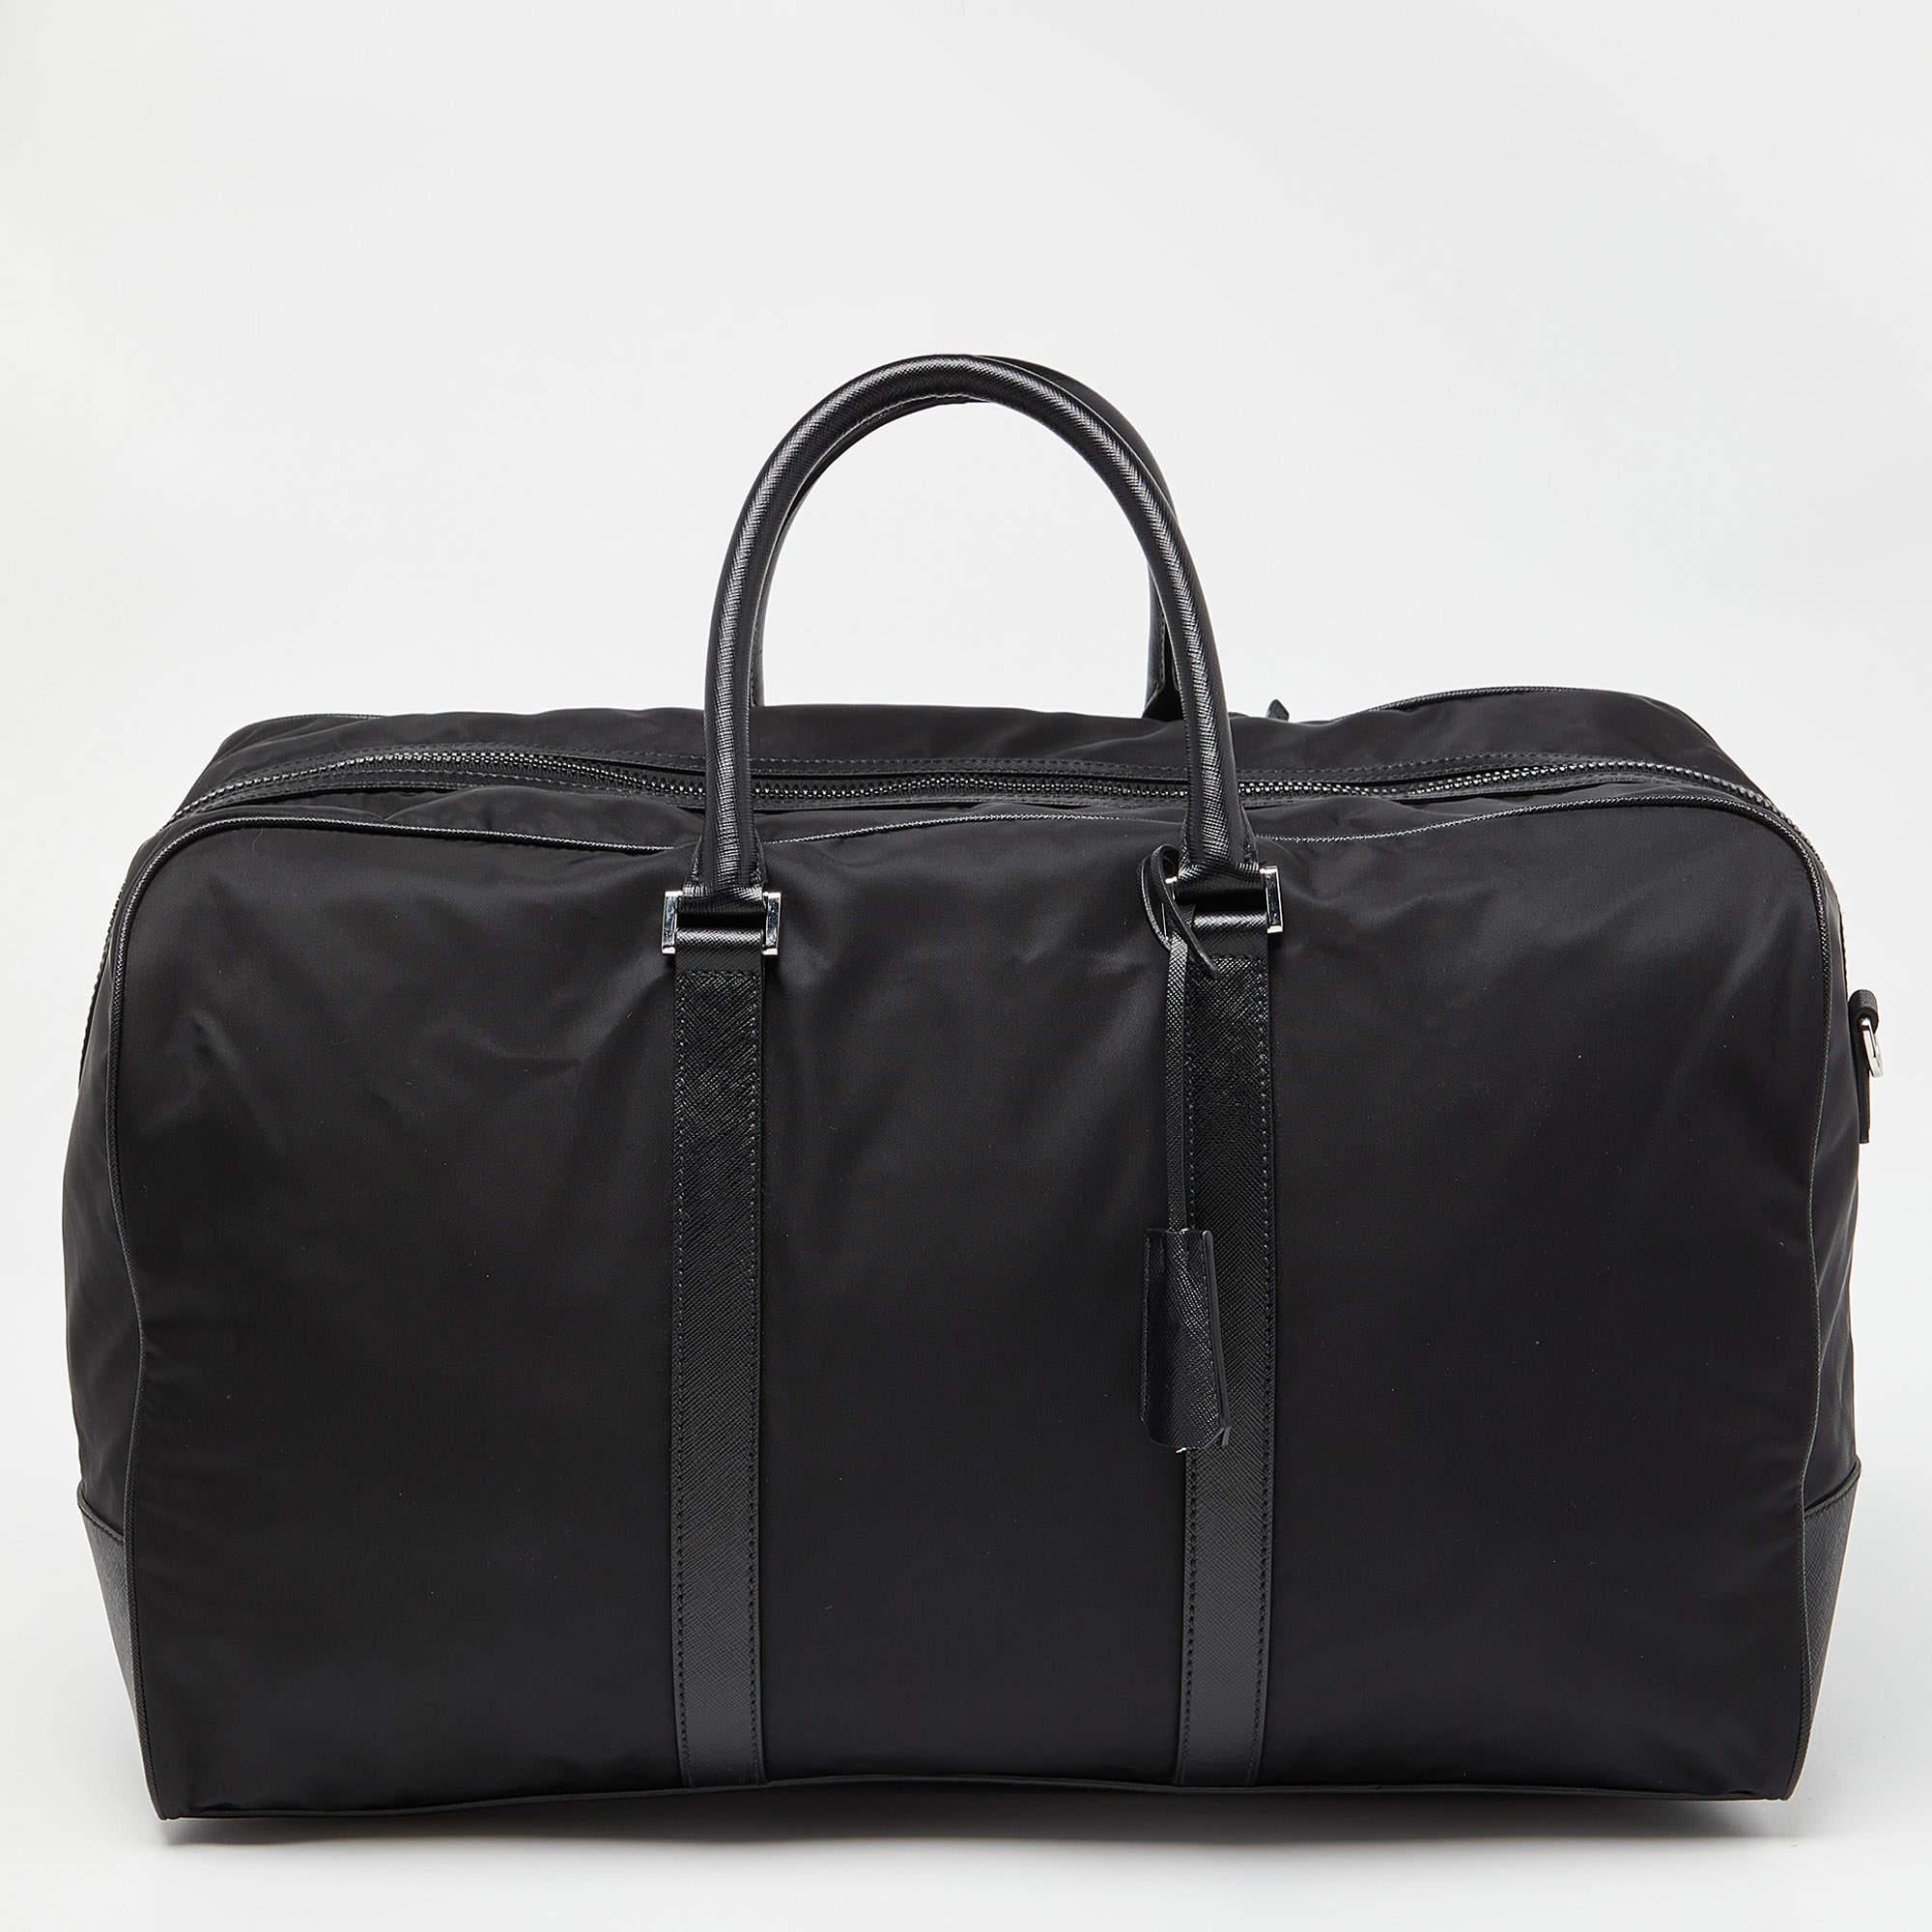 The Prada duffle bag is a sophisticated and versatile accessory. It combines durable black nylon with elegant leather accents. With a spacious interior, multiple pockets, and a detachable shoulder strap, it's perfect for both travel and everyday